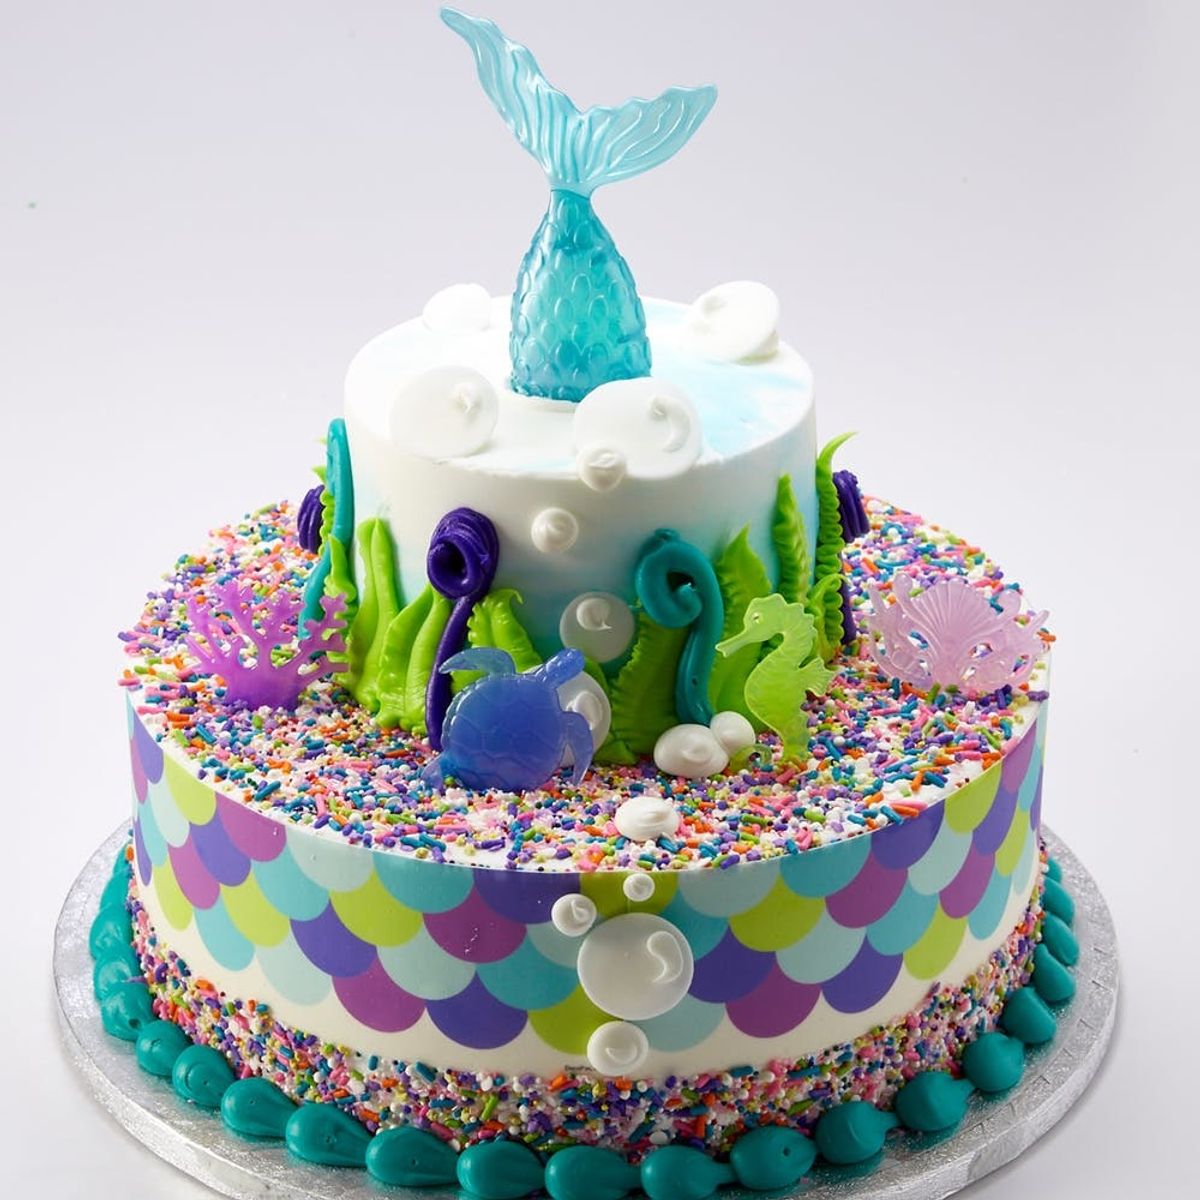 Sam’s Club Will Release a Mermaid Cake That We Can’t Wait to Dive Into